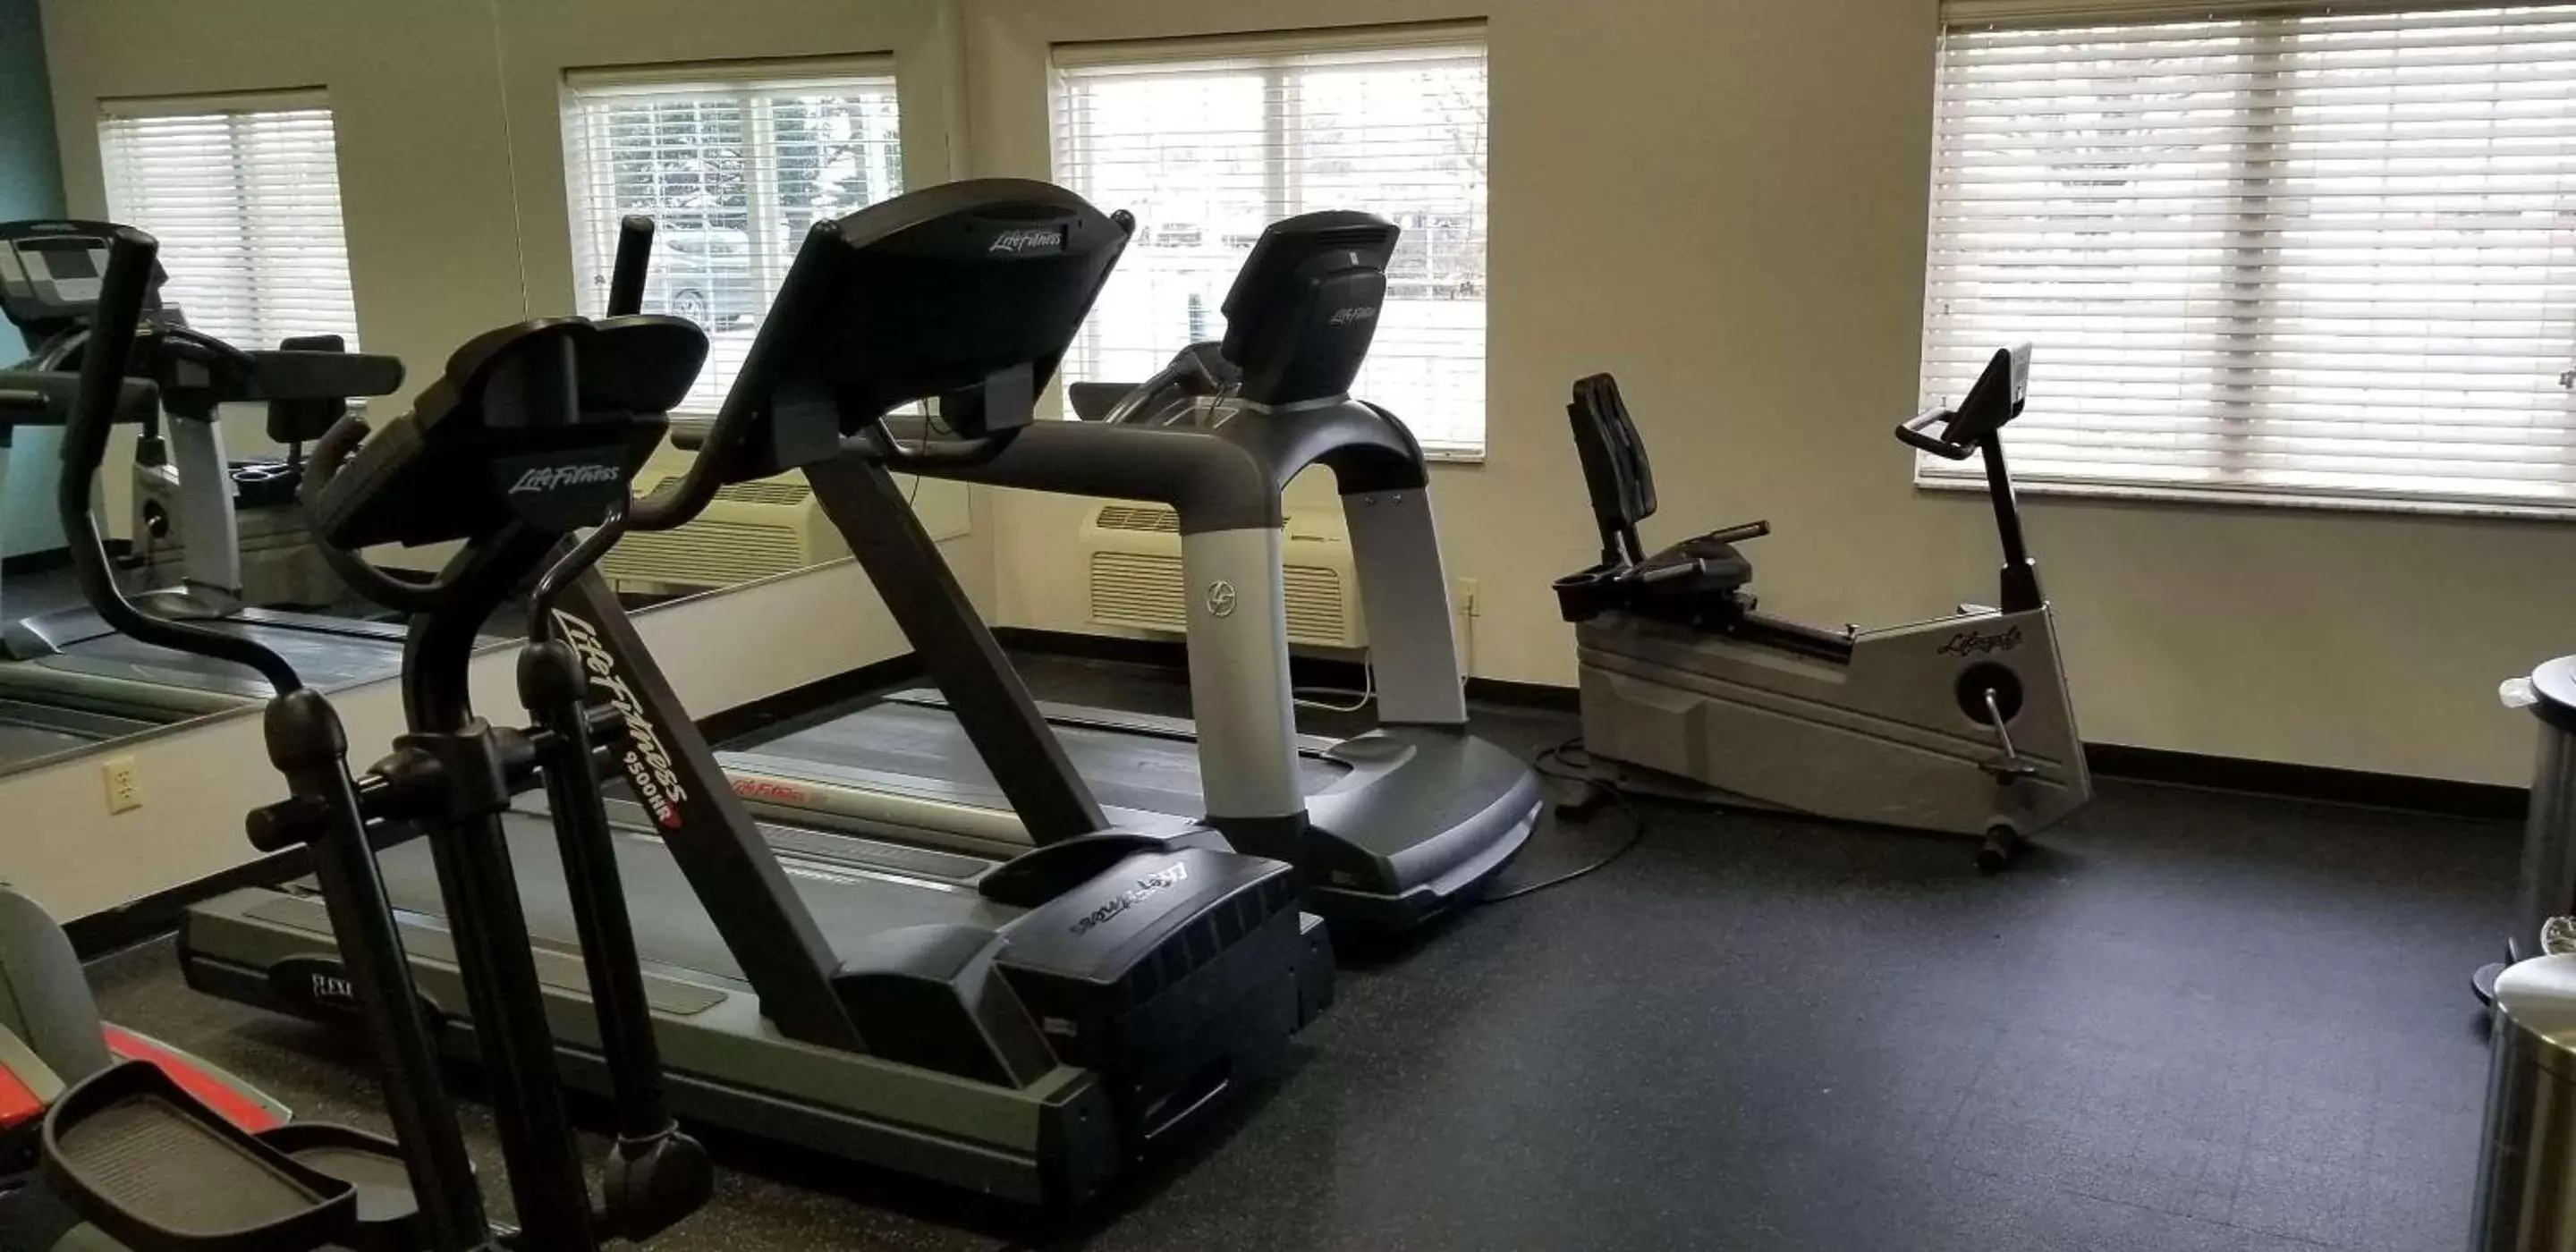 Fitness centre/facilities, Fitness Center/Facilities in Country Inn & Suites by Radisson, Kalamazoo, MI